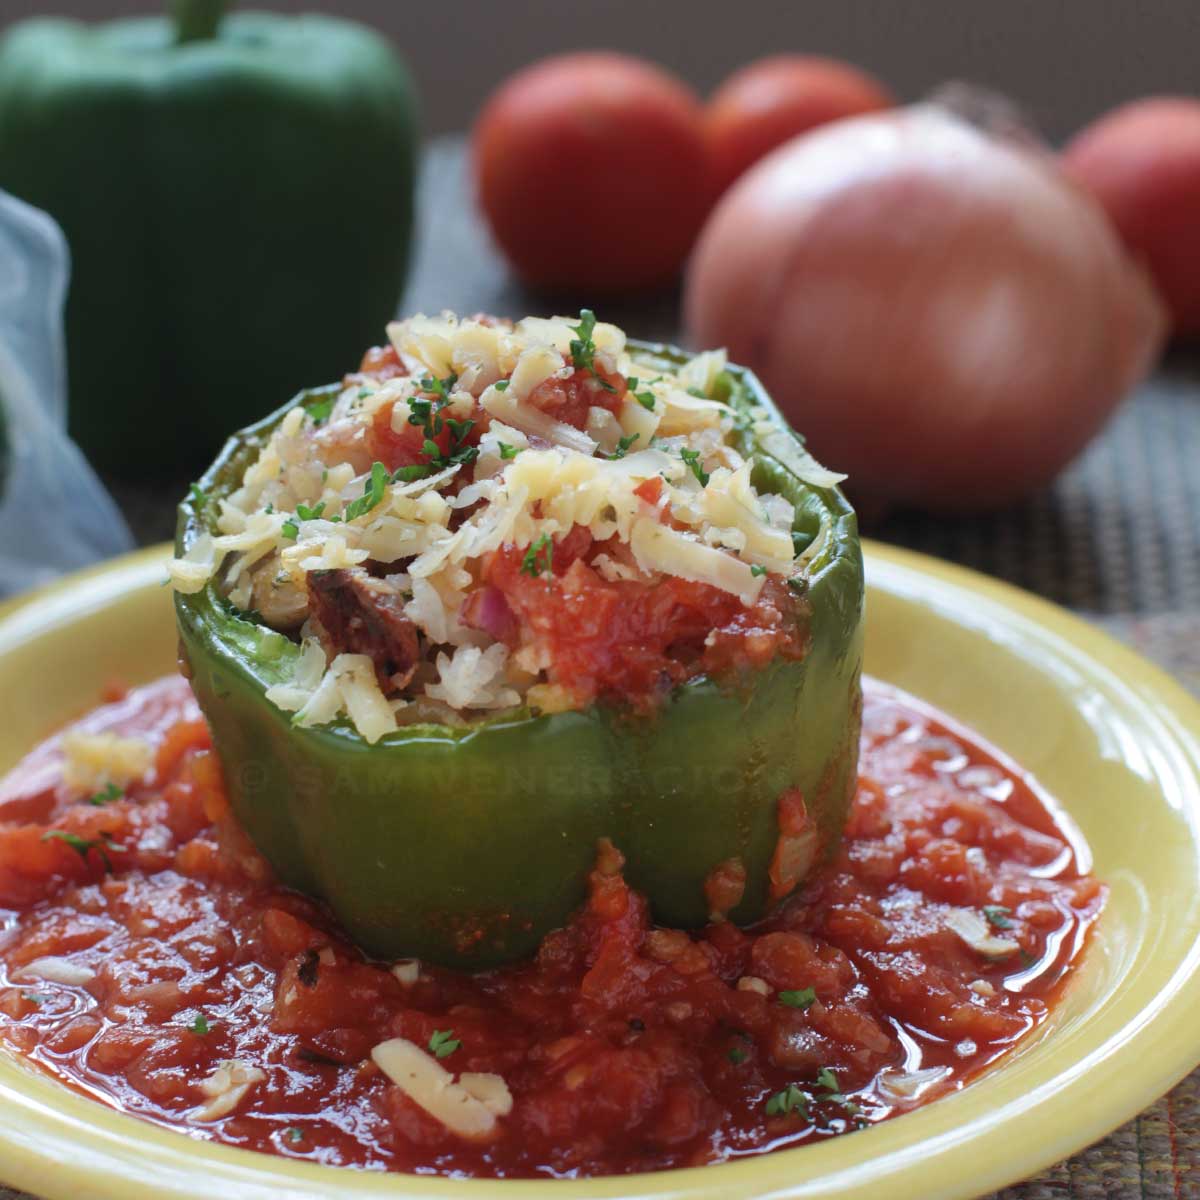 Baked bell pepper stuffed with rice, mushrooms and cheese